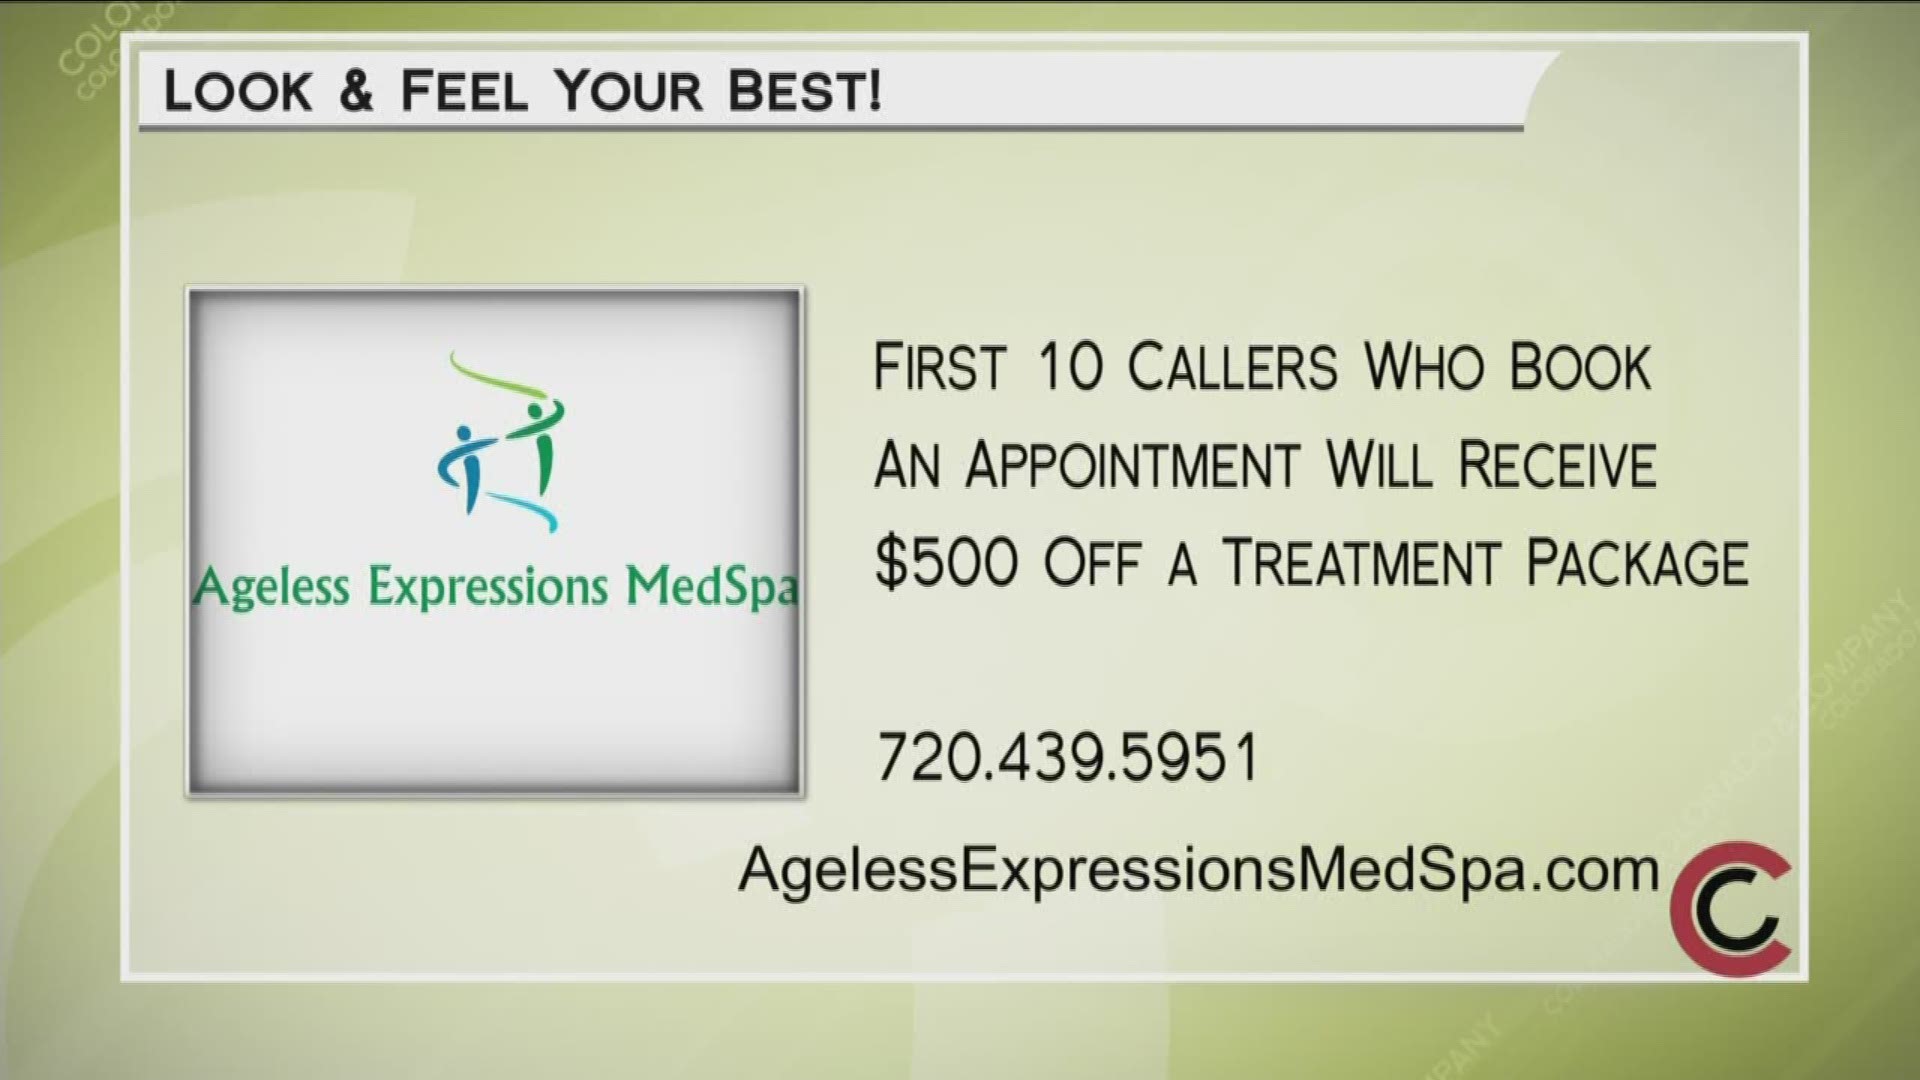 Call 720.439.5951 or visit AgelessExpressionsMedSpa.com to find out if their treatment package is right for you.